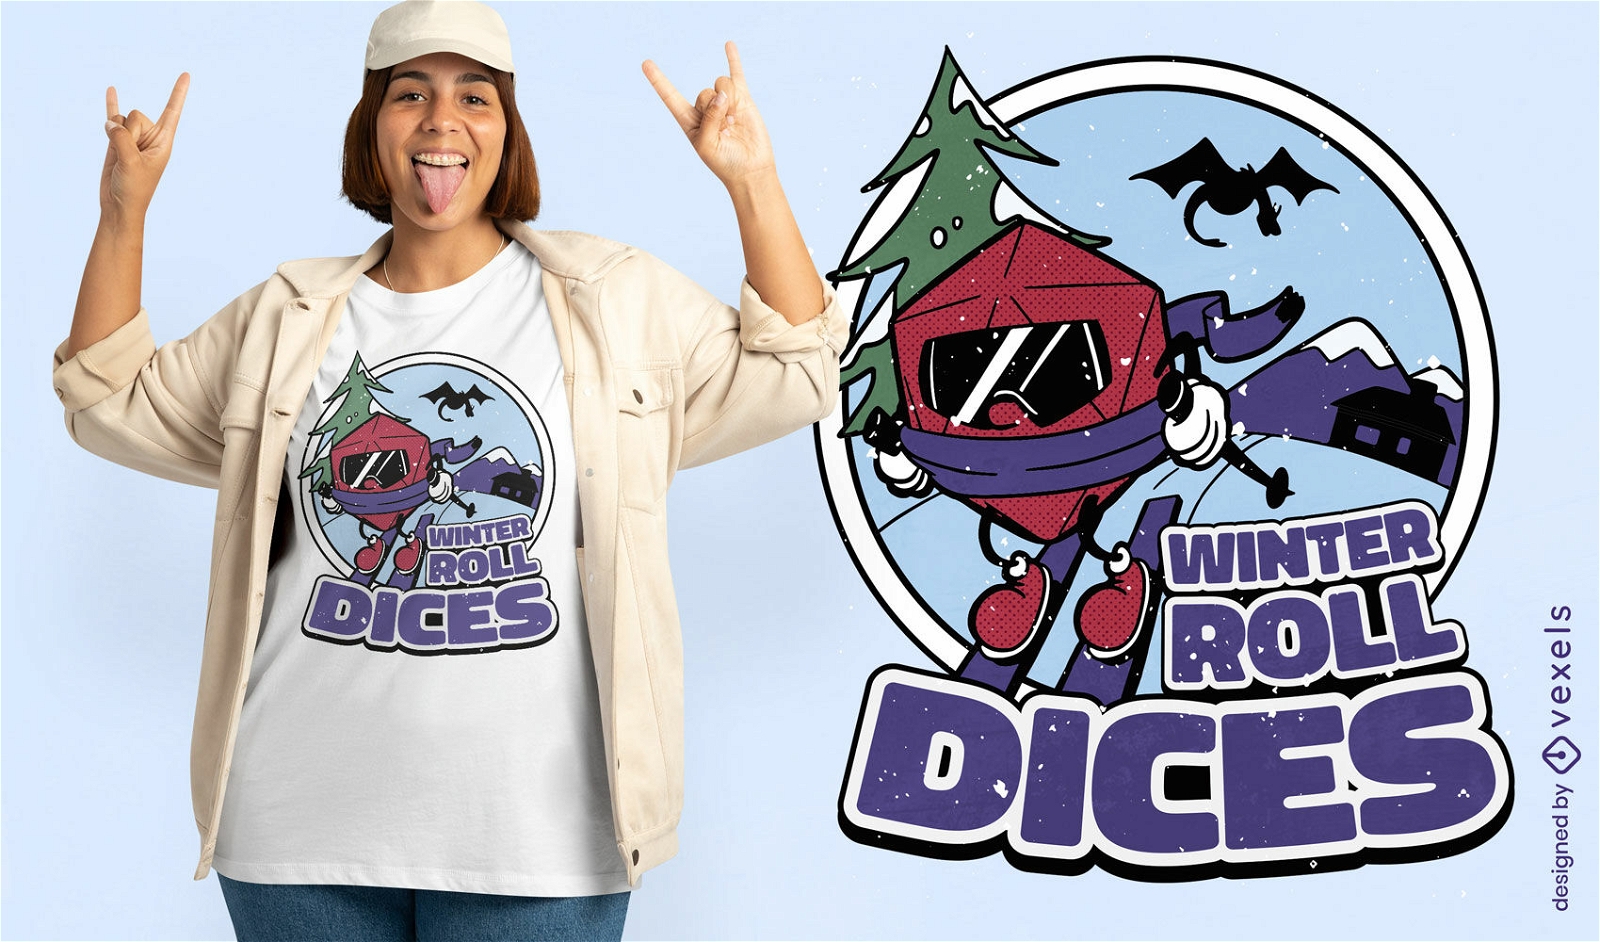 Role playing dice skiing t-shirt design